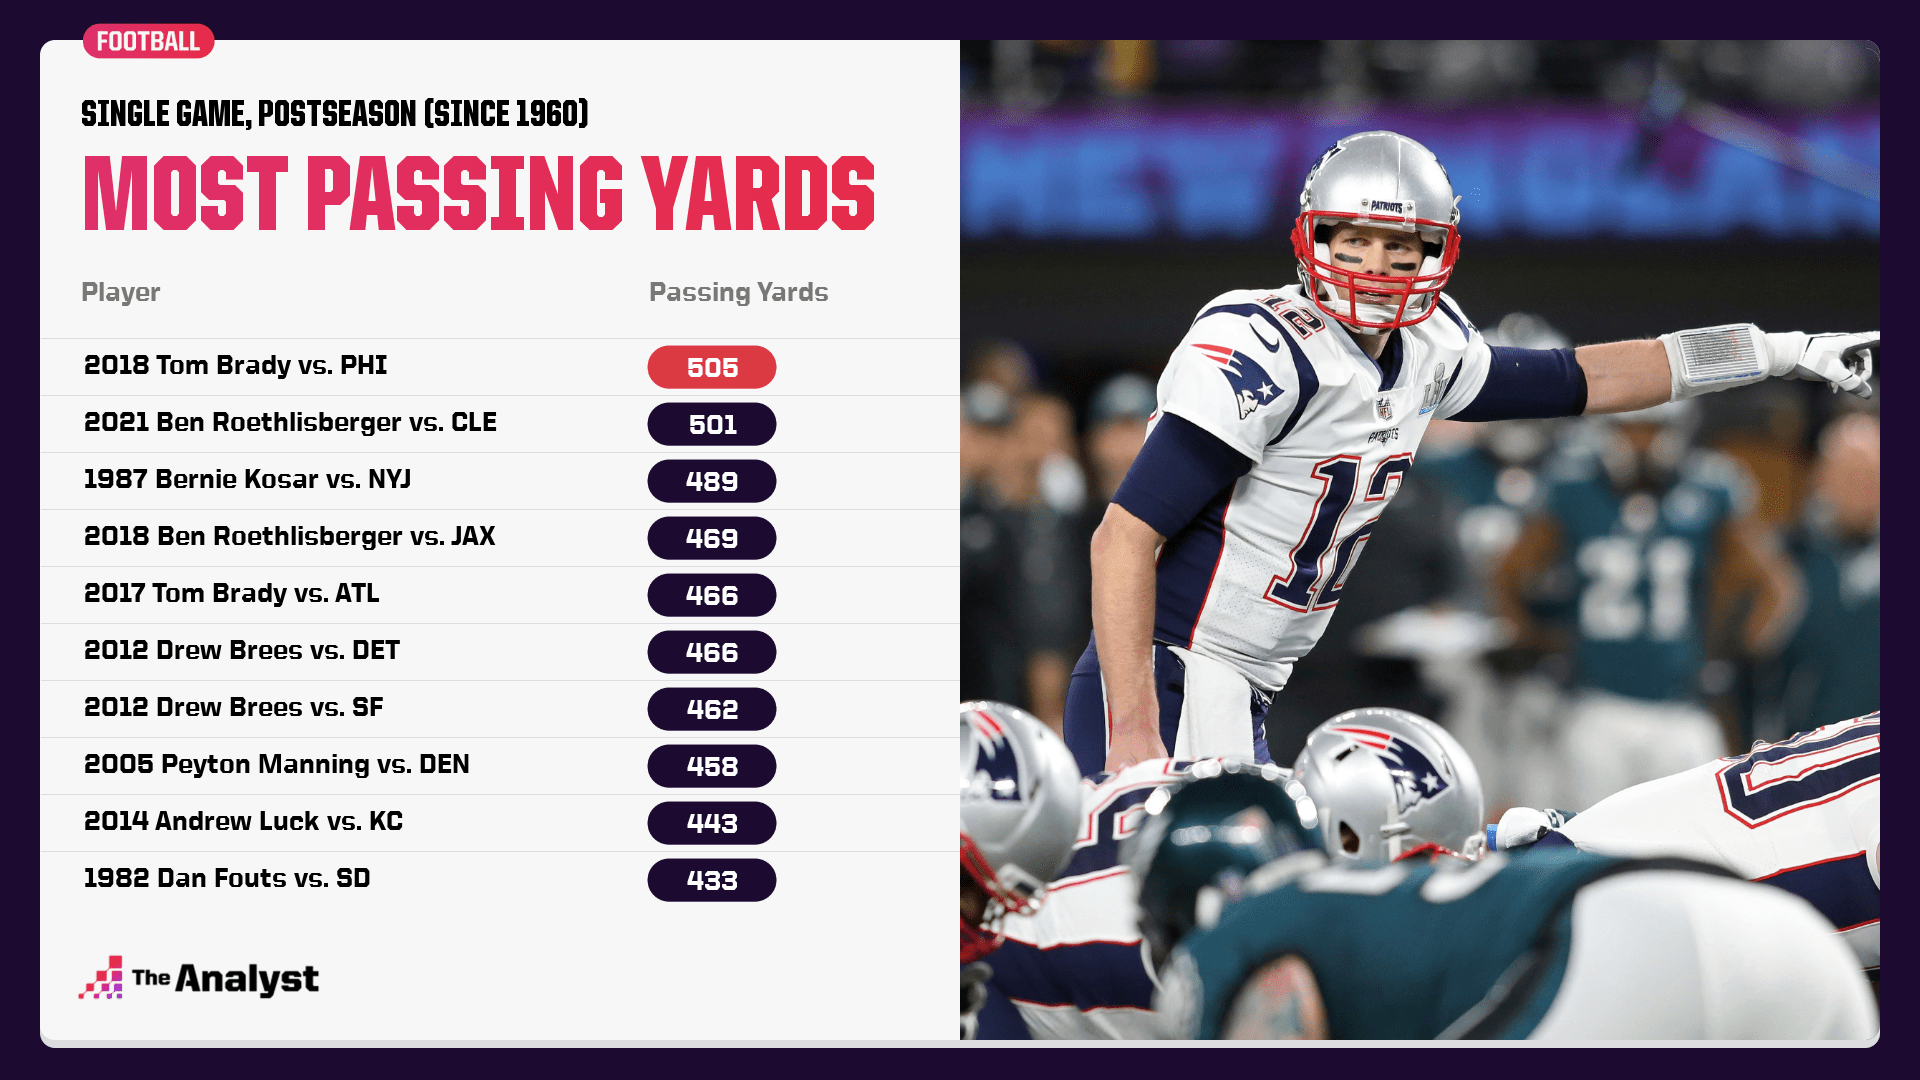 Most passing yards in a postseason game